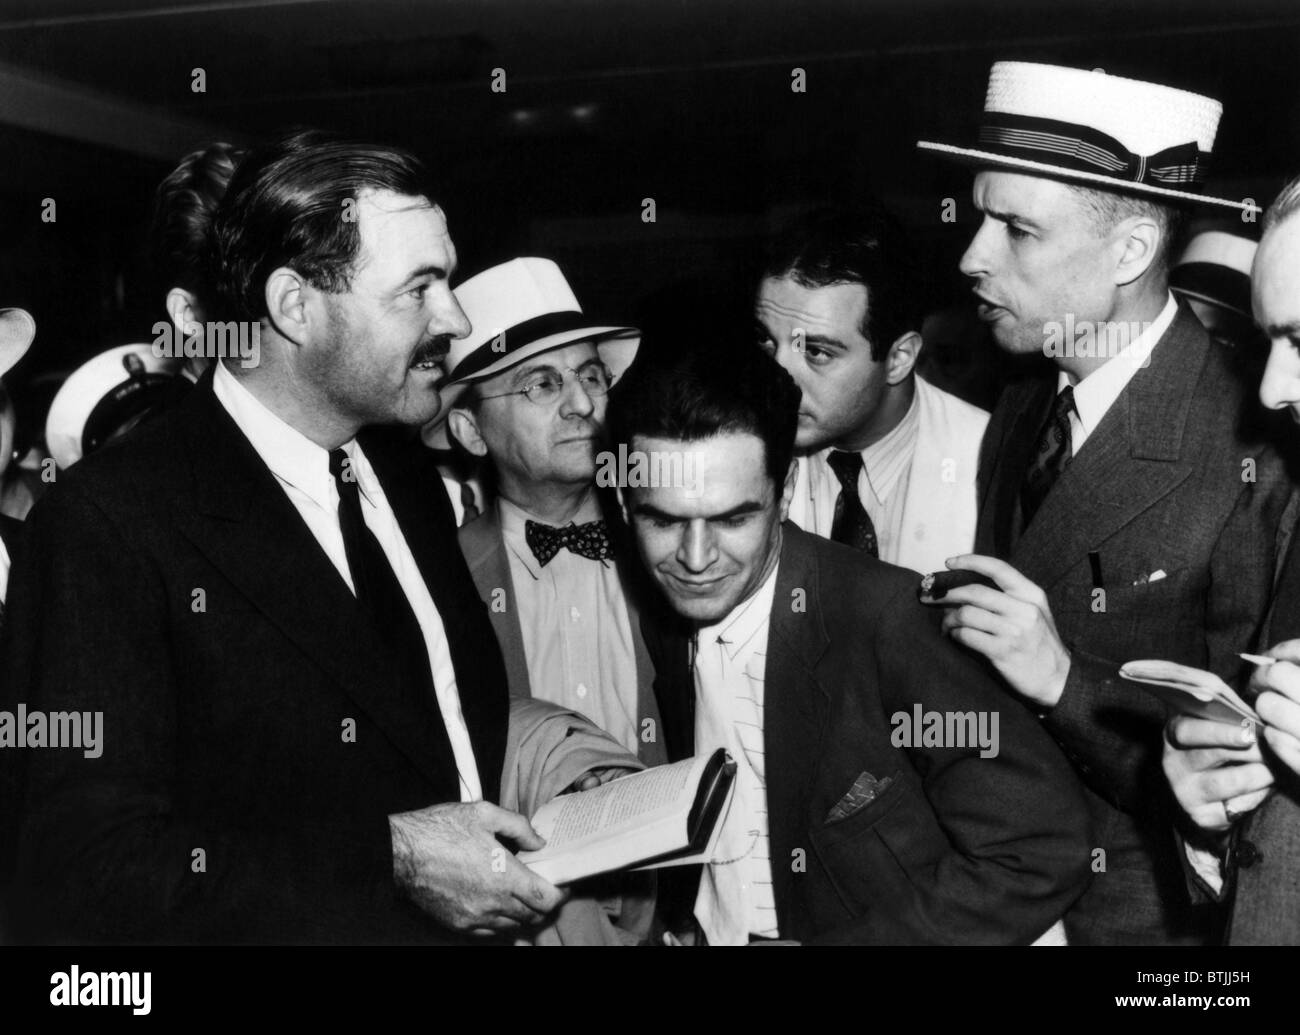 Ernest Hemingway being interviewed in the press before returning to the Spanish Civil War, New York City August 1937.Courtesy CS Stock Photo